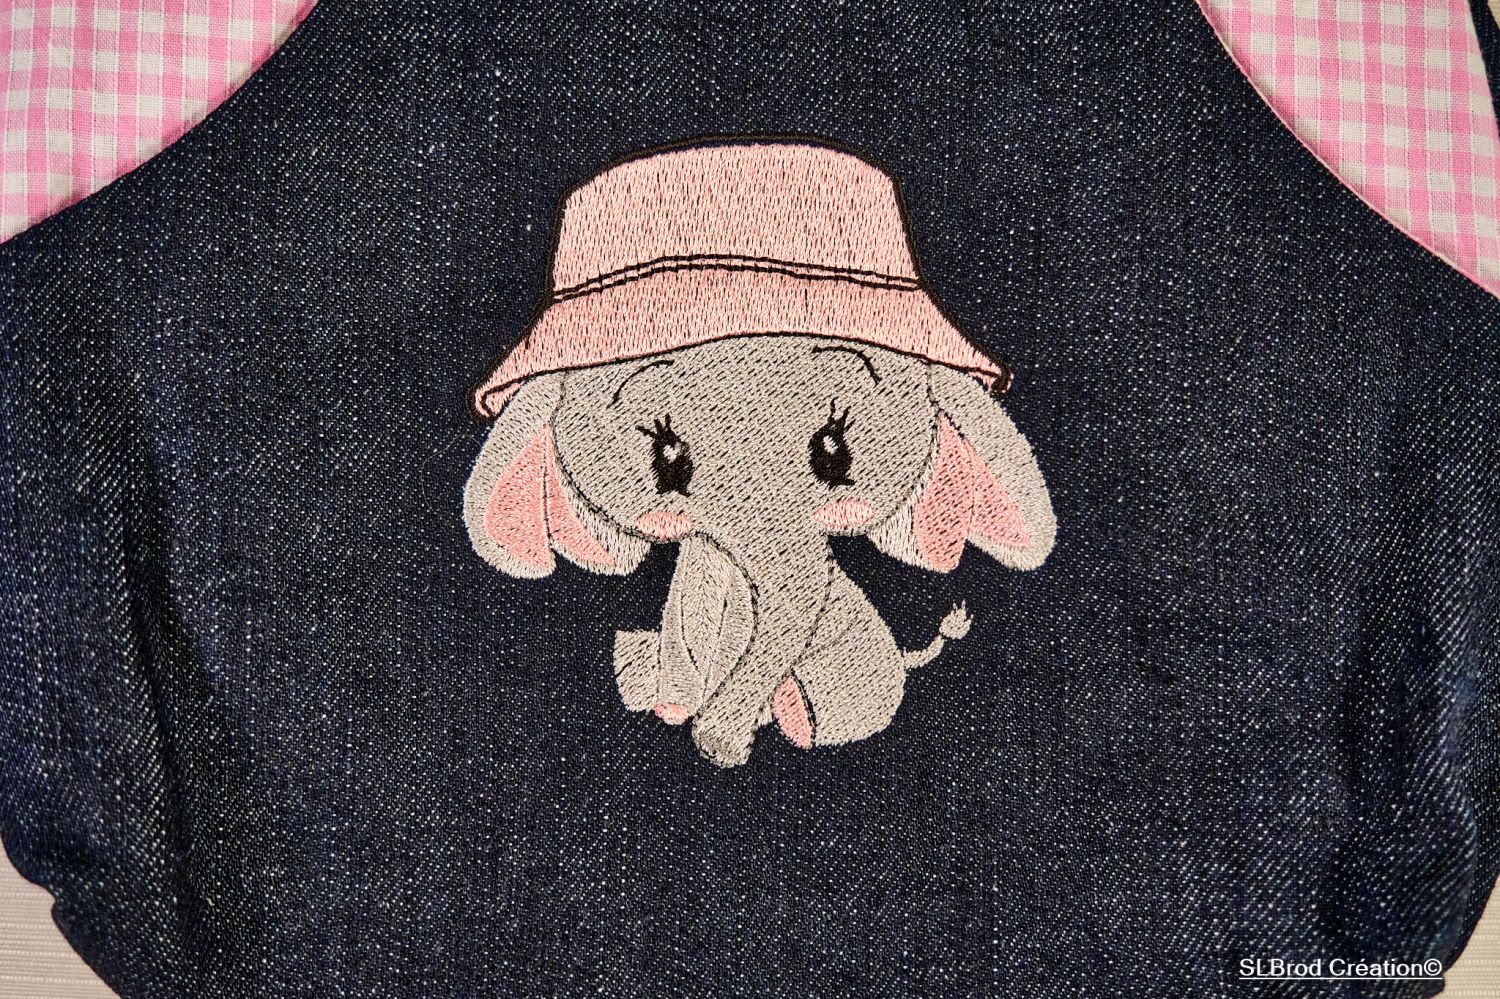 Embroidered children's backpack elephant with pink hat customizable